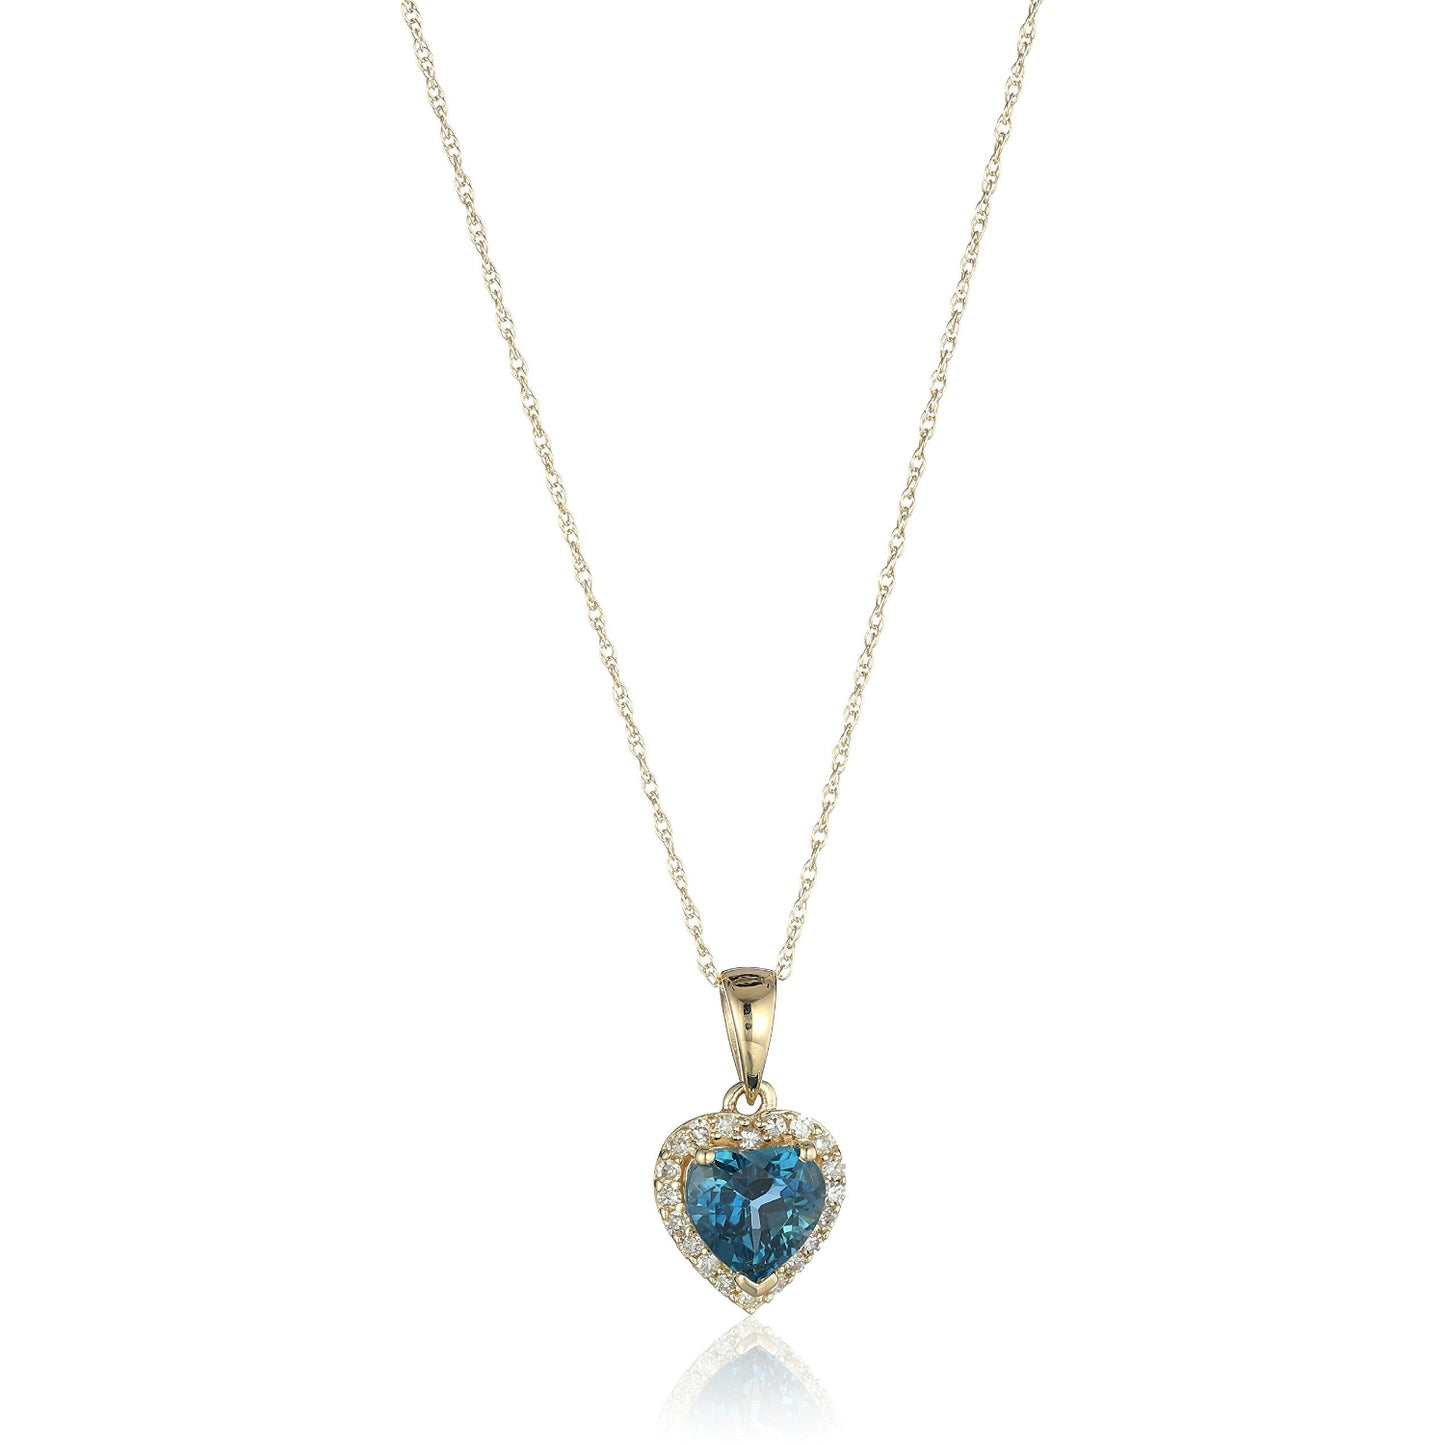 10k Yellow Gold London Blue Topaz Heart and Diamond Pendant Necklace, (1/10 cttw H-I Color, I1-I2 Clarity), 18" - pinctore